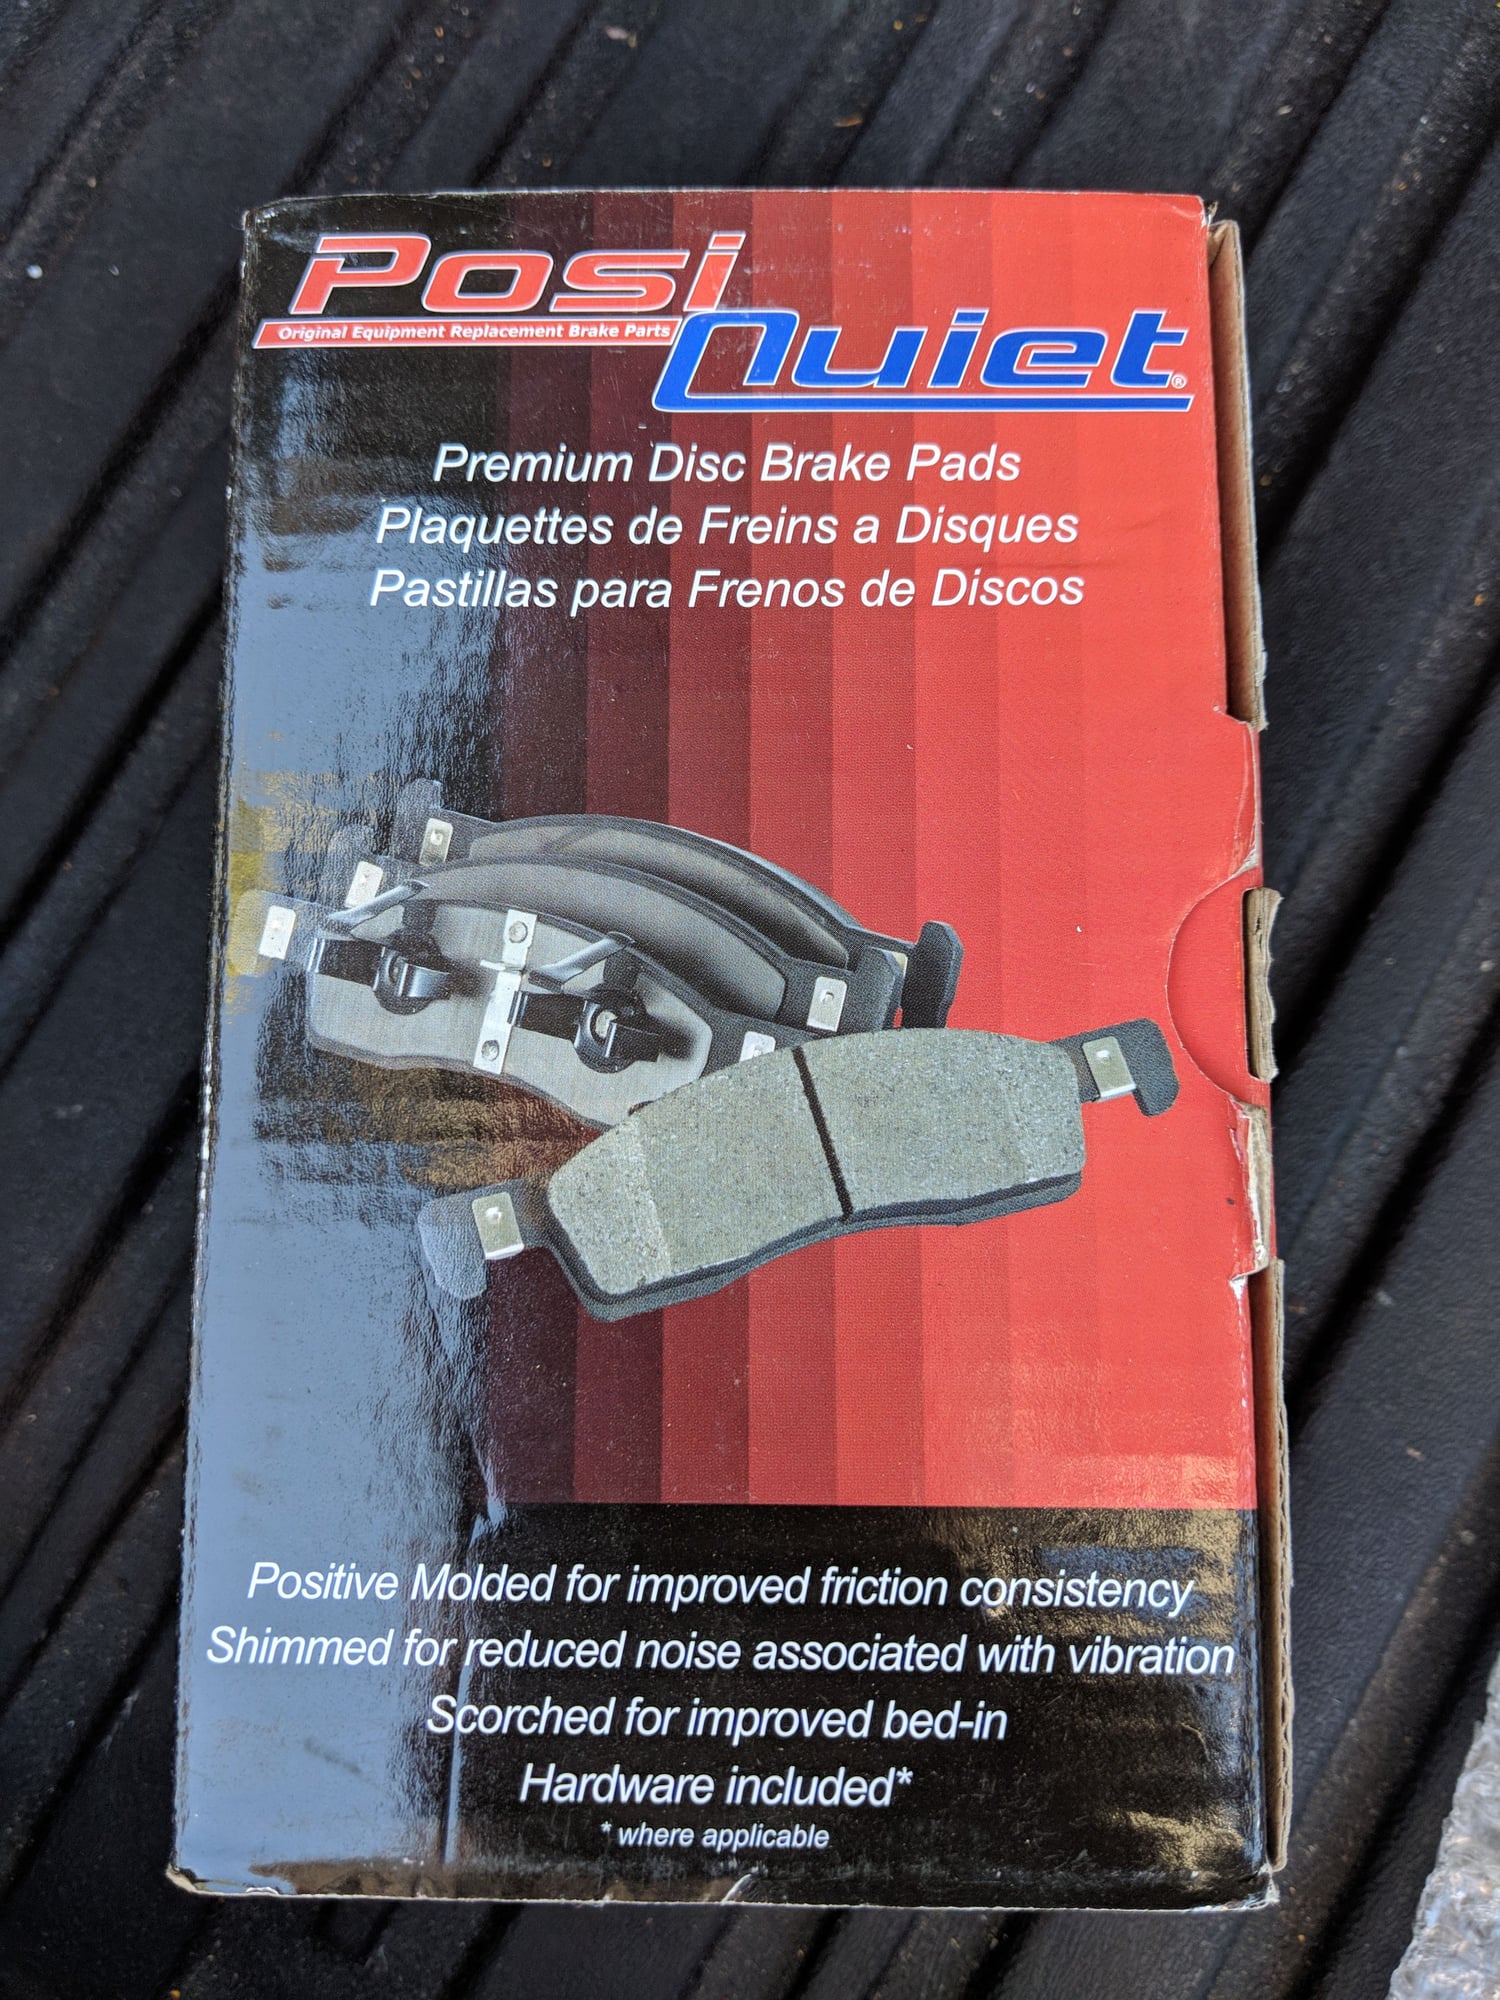 2008 Acura TL - PosiQuiet Rear Brake Pads for 3G TL Brand New - Brakes - $40 - San Diego, CA 92128, United States